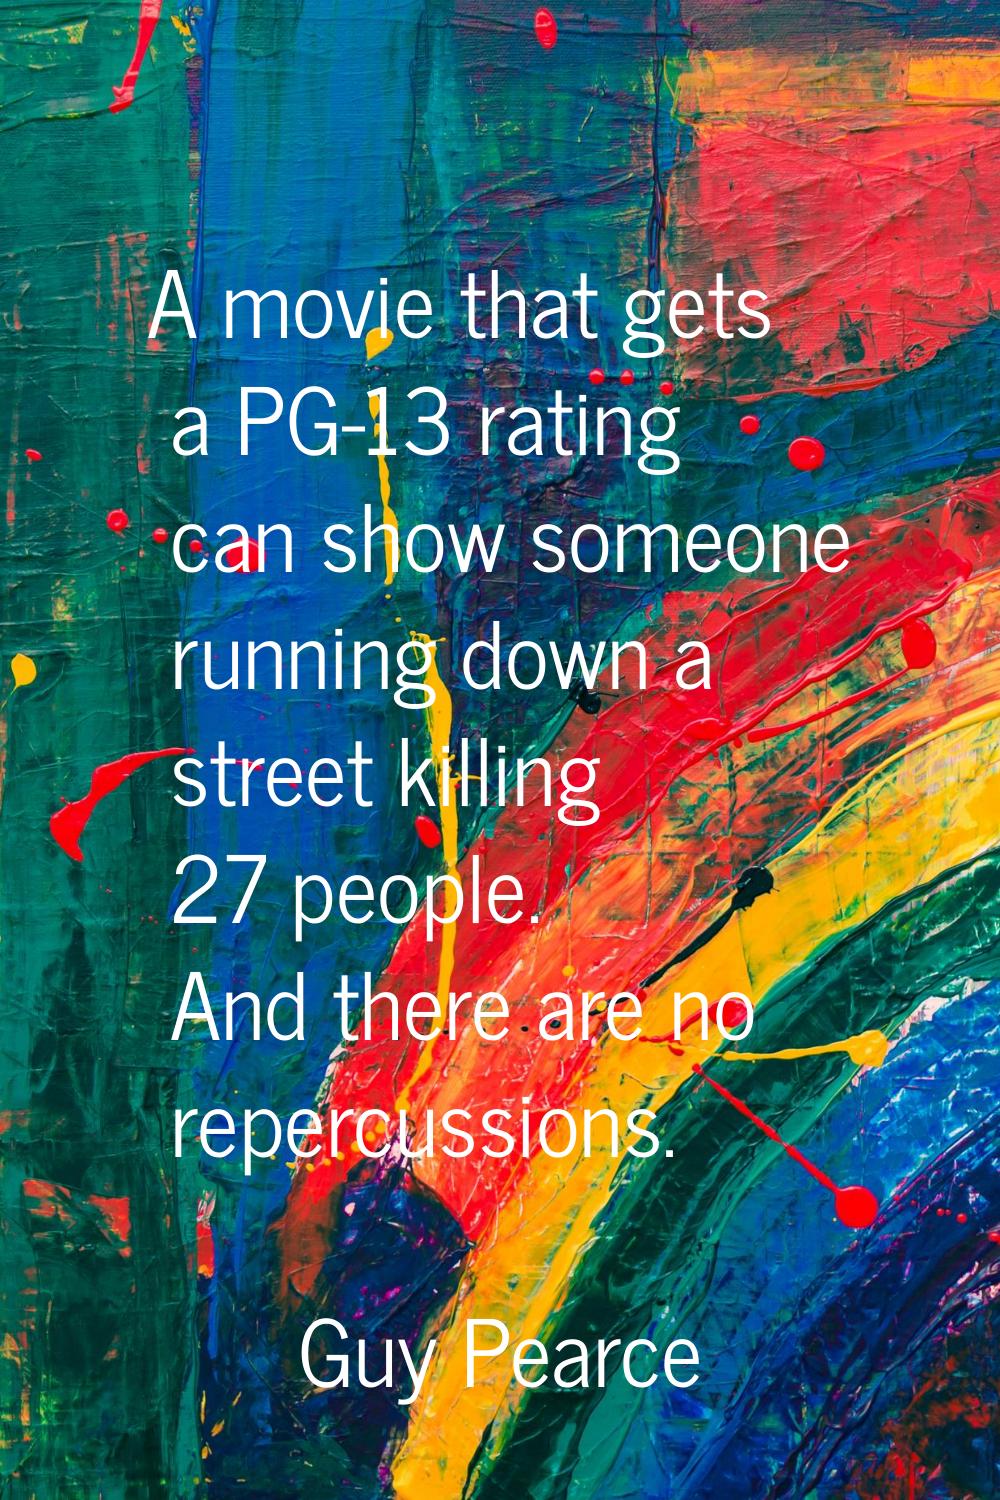 A movie that gets a PG-13 rating can show someone running down a street killing 27 people. And ther